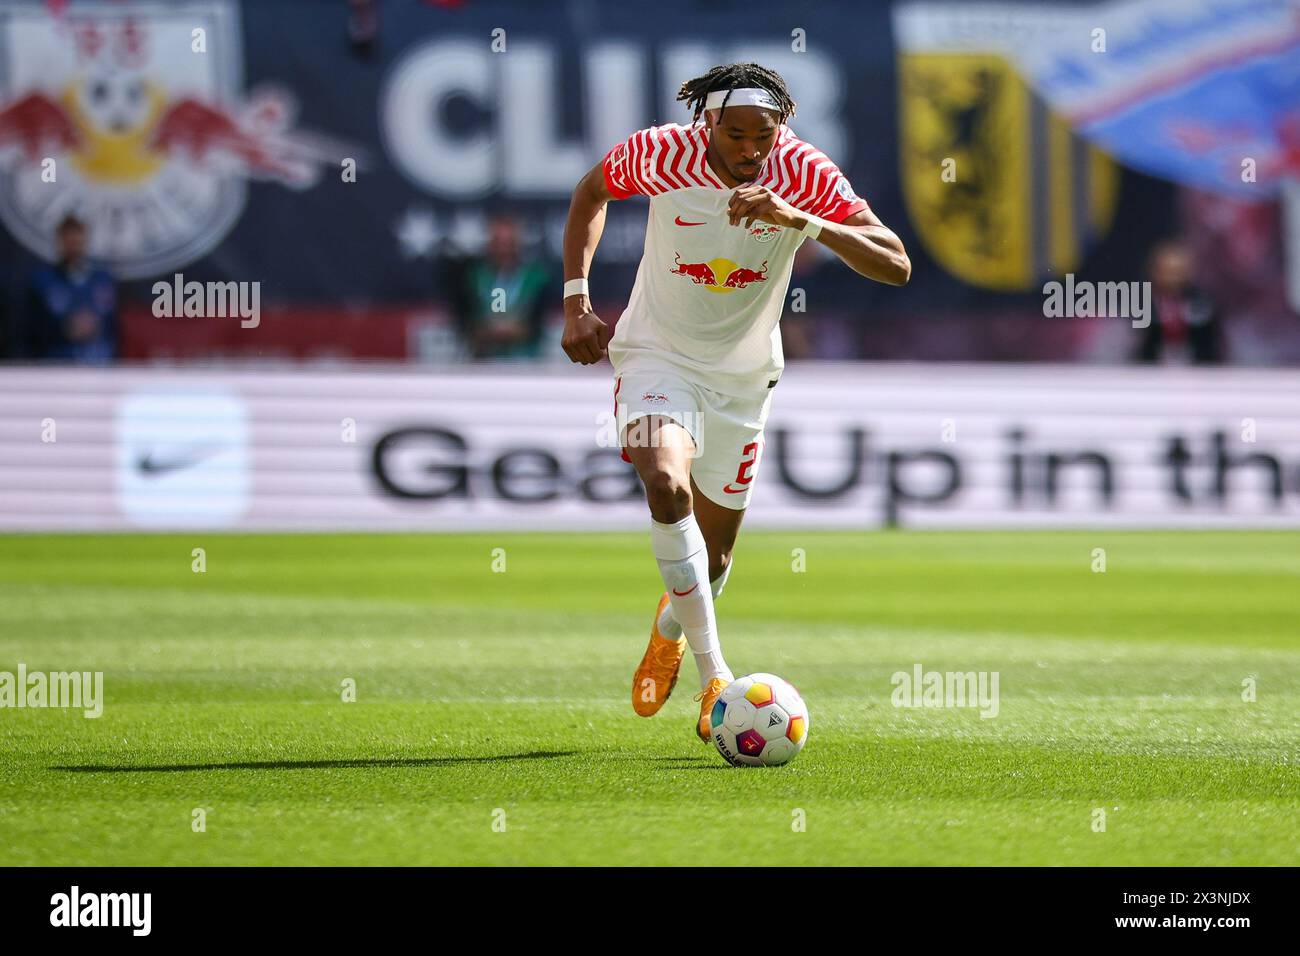 Leipzig, Germany. 27th Apr, 2024. Soccer: Bundesliga, RB Leipzig - Borussia Dortmund, Matchday 31 at the Red Bull Arena. Leipzig player Mohamed Simakan on the ball. Credit: Jan Woitas/dpa - IMPORTANT NOTE: In accordance with the regulations of the DFL German Football League and the DFB German Football Association, it is prohibited to utilize or have utilized photographs taken in the stadium and/or of the match in the form of sequential images and/or video-like photo series./dpa/Alamy Live News Stock Photo